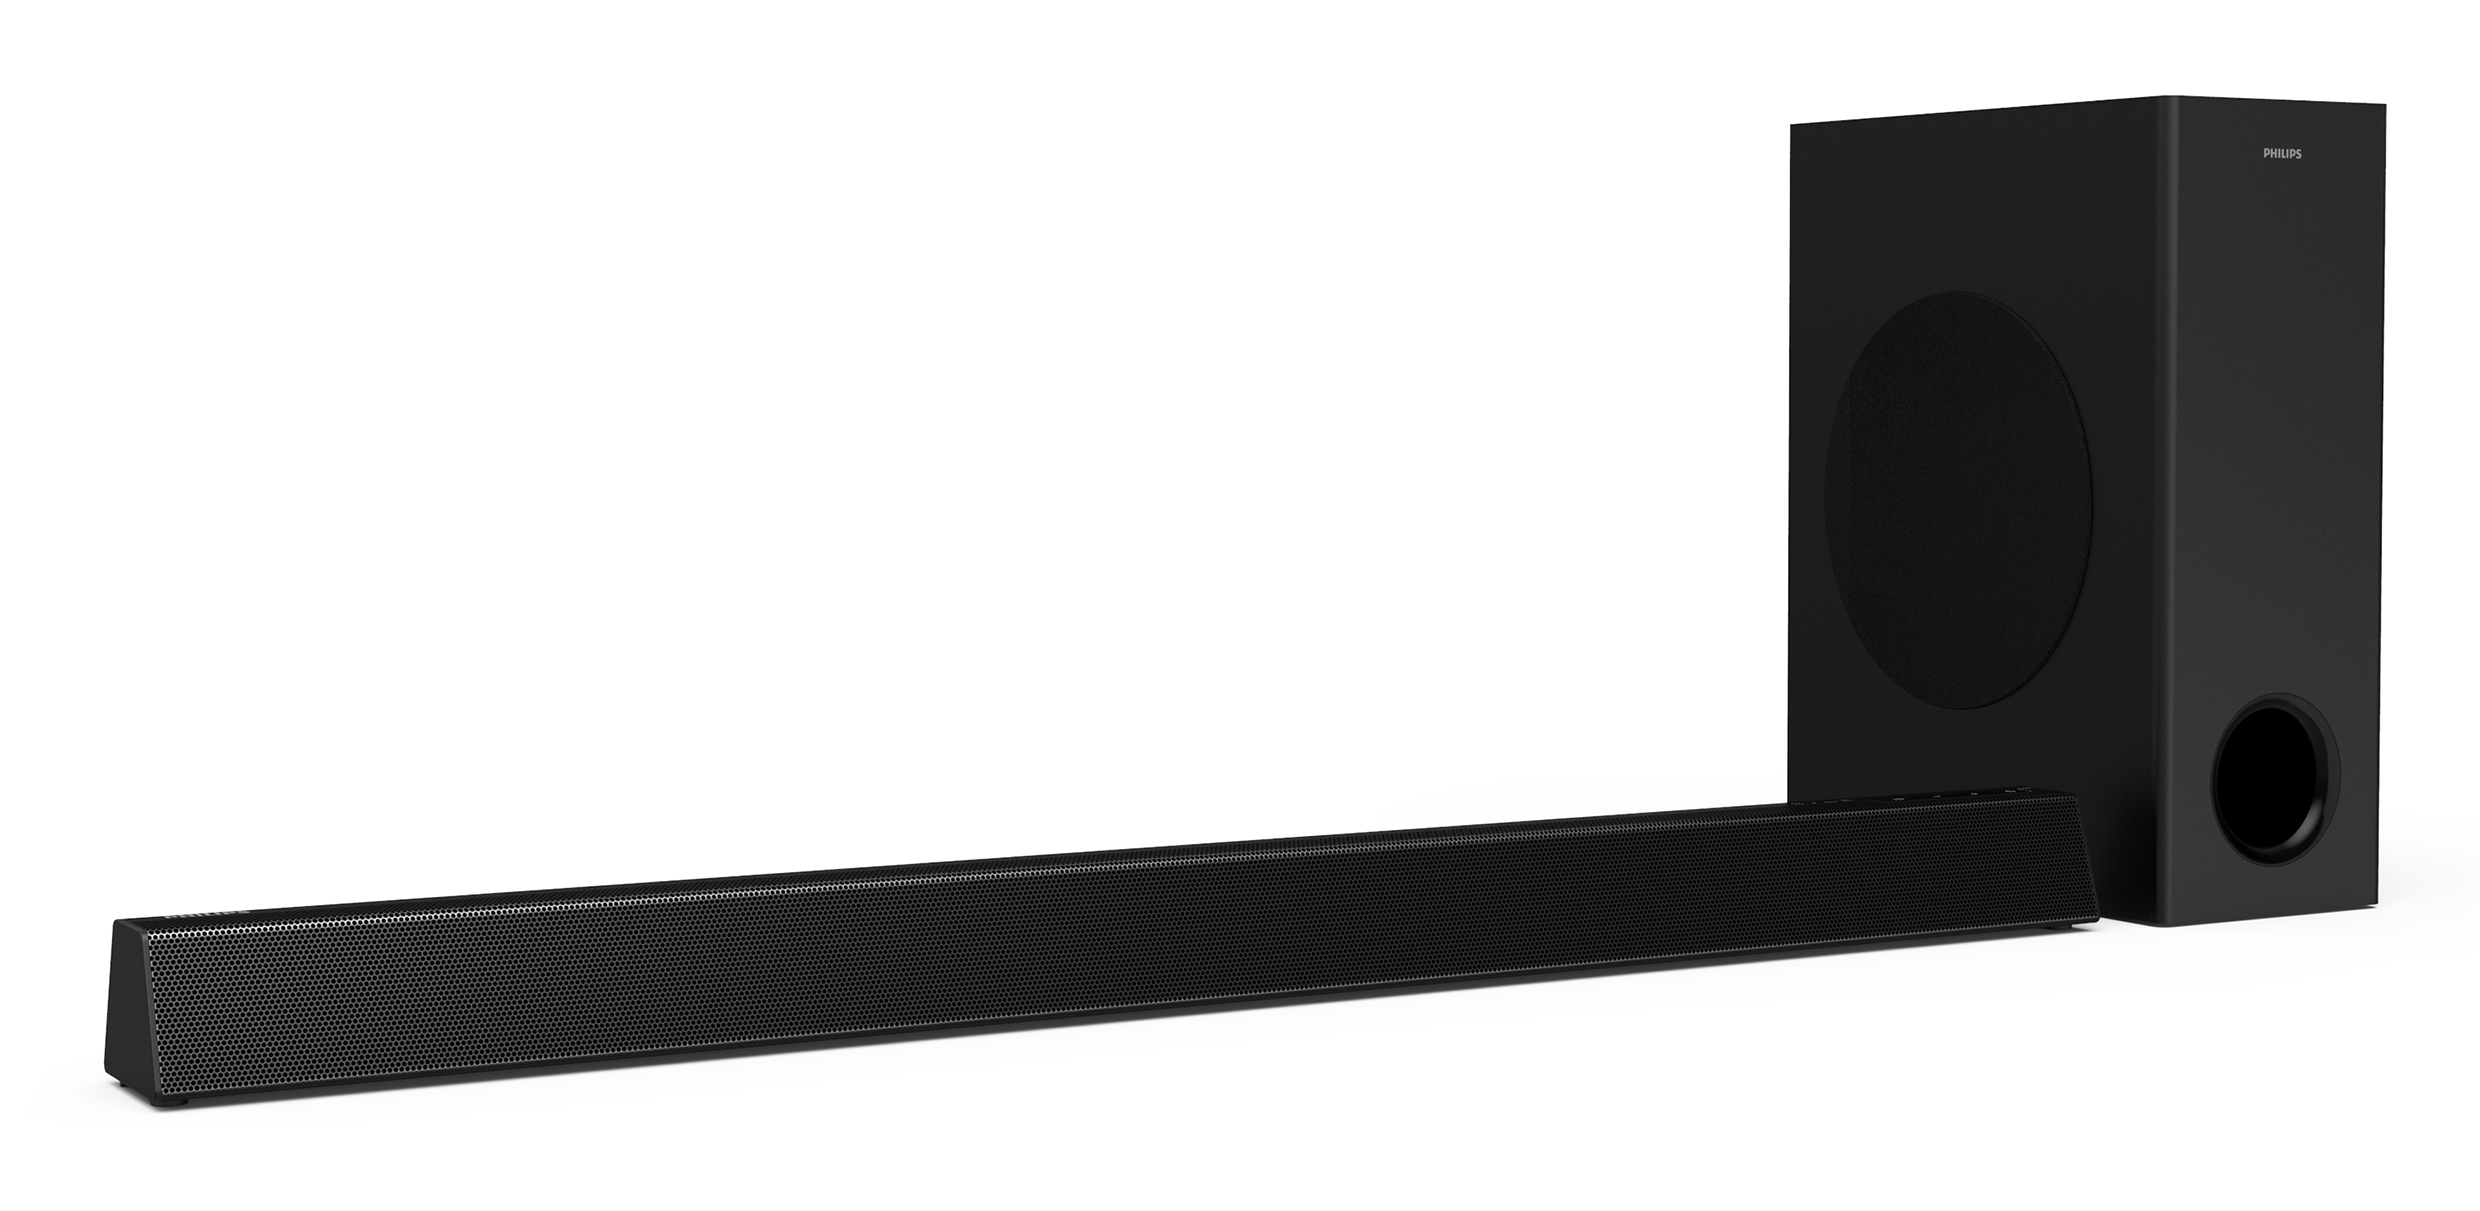 Philips HTL3320 3.1 Channel Dolby Audio Soundbar with Wireless Subwoofer - image 3 of 5